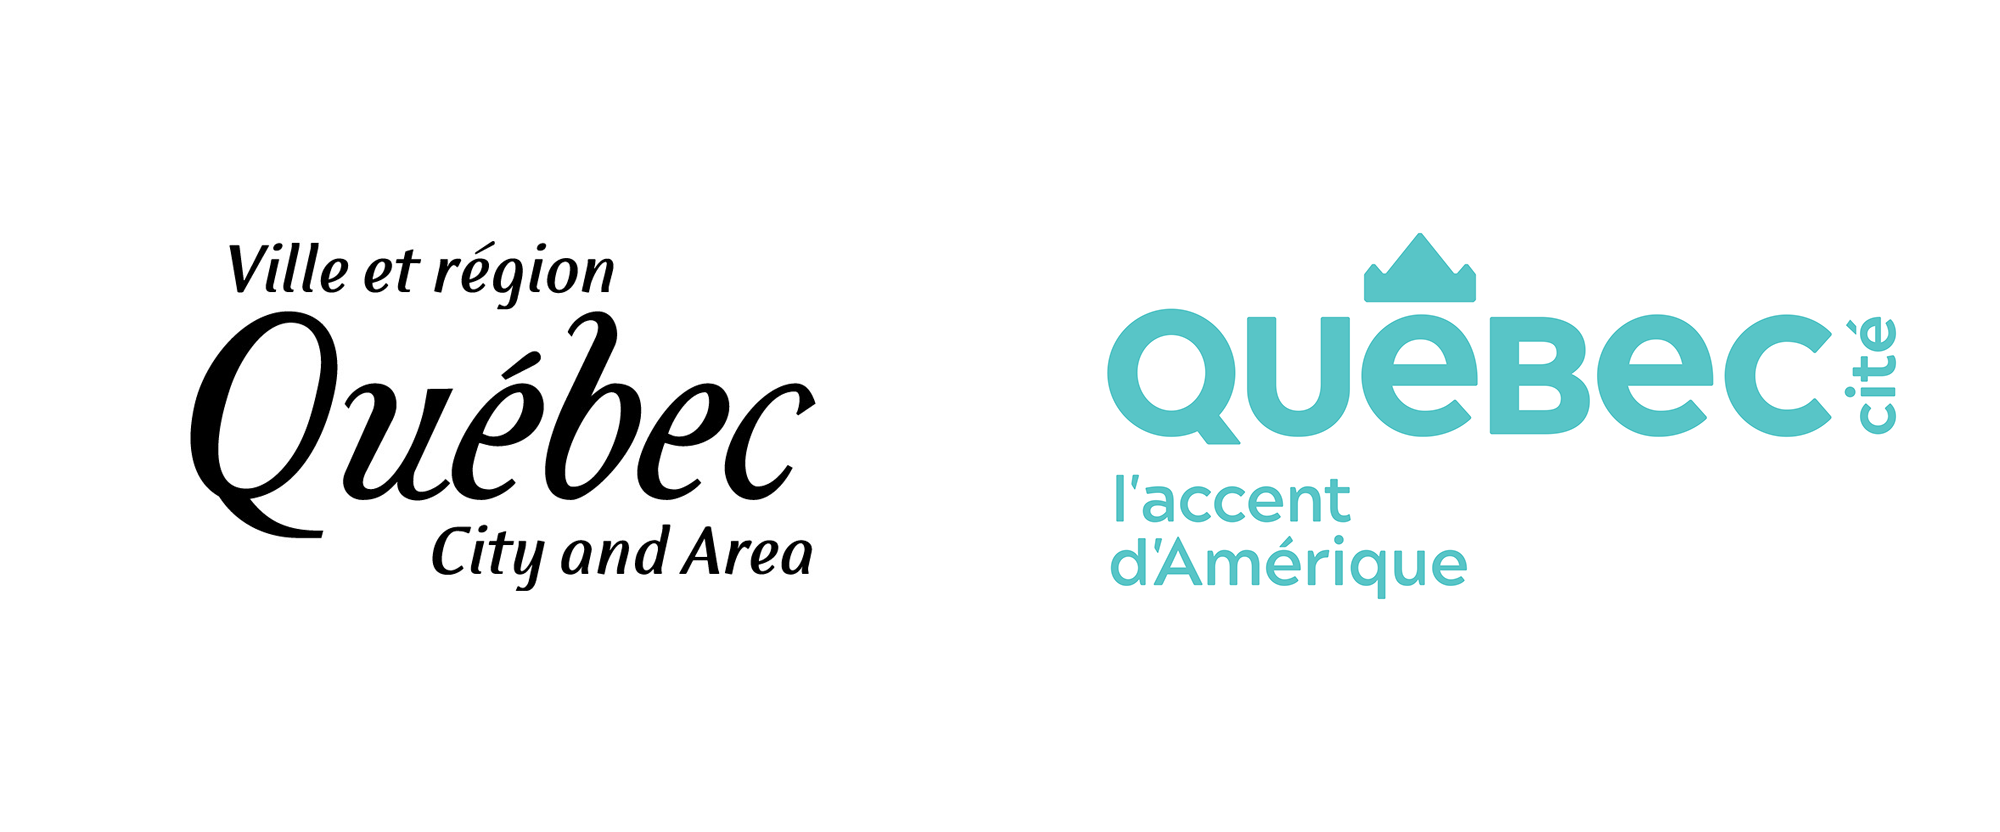 New Logo and Identity for Québec City Tourism by Cossette